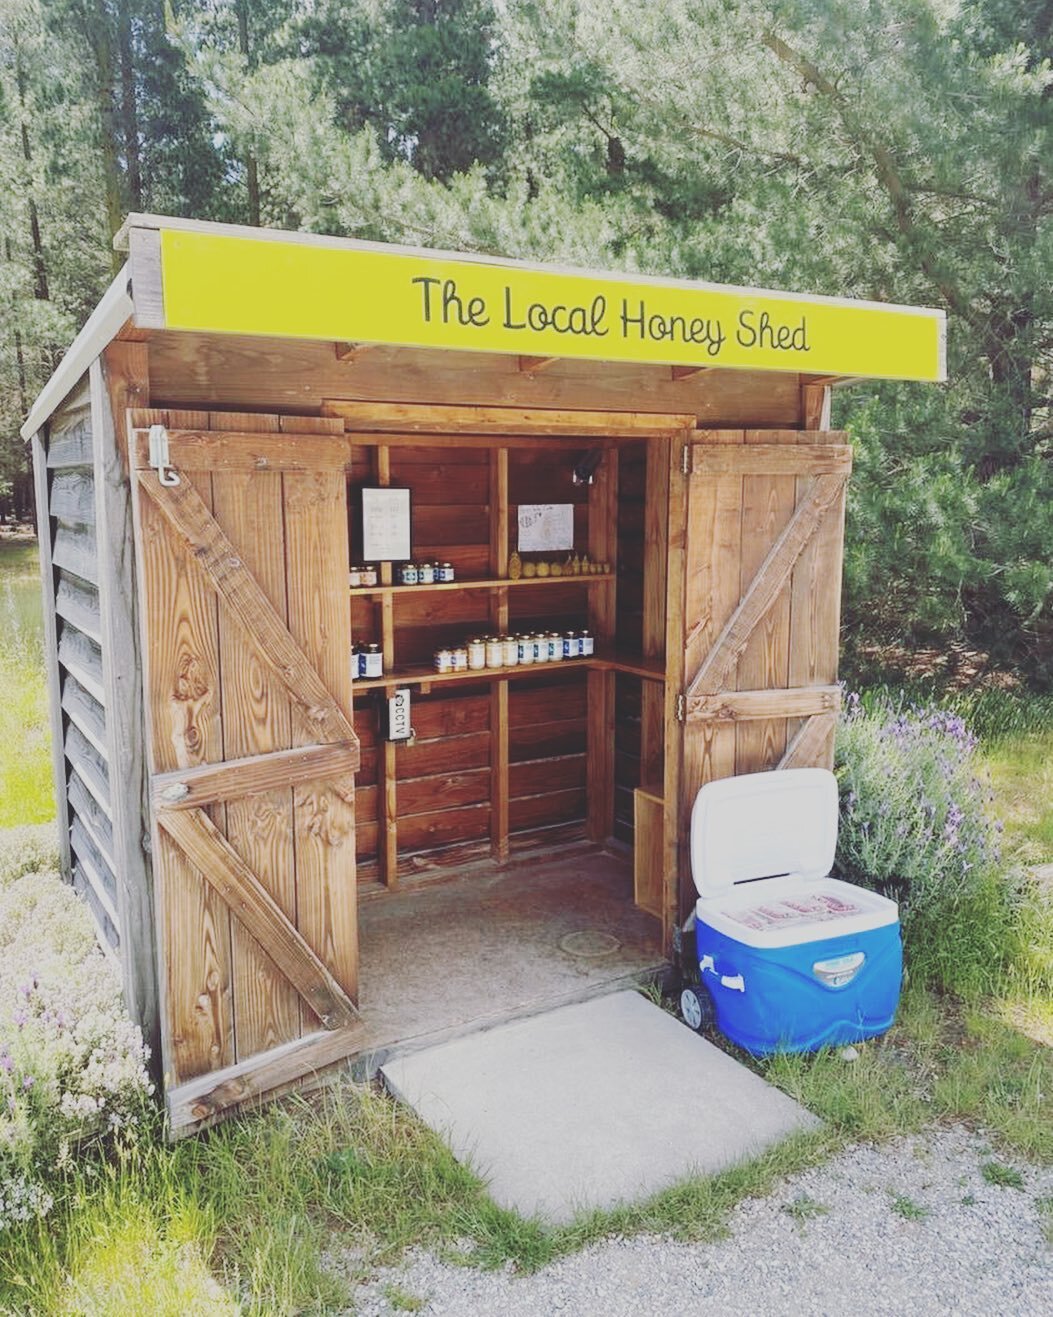 The local honey shed located between Cromwell and Bannockburn is one of the spots you can pick up a punnet of fresh strawberries today, along with Royalburn Store, Arrowtown &amp; Qtwn 4square, Freshlink Wanaka and Soul Food or pop out to our farm an